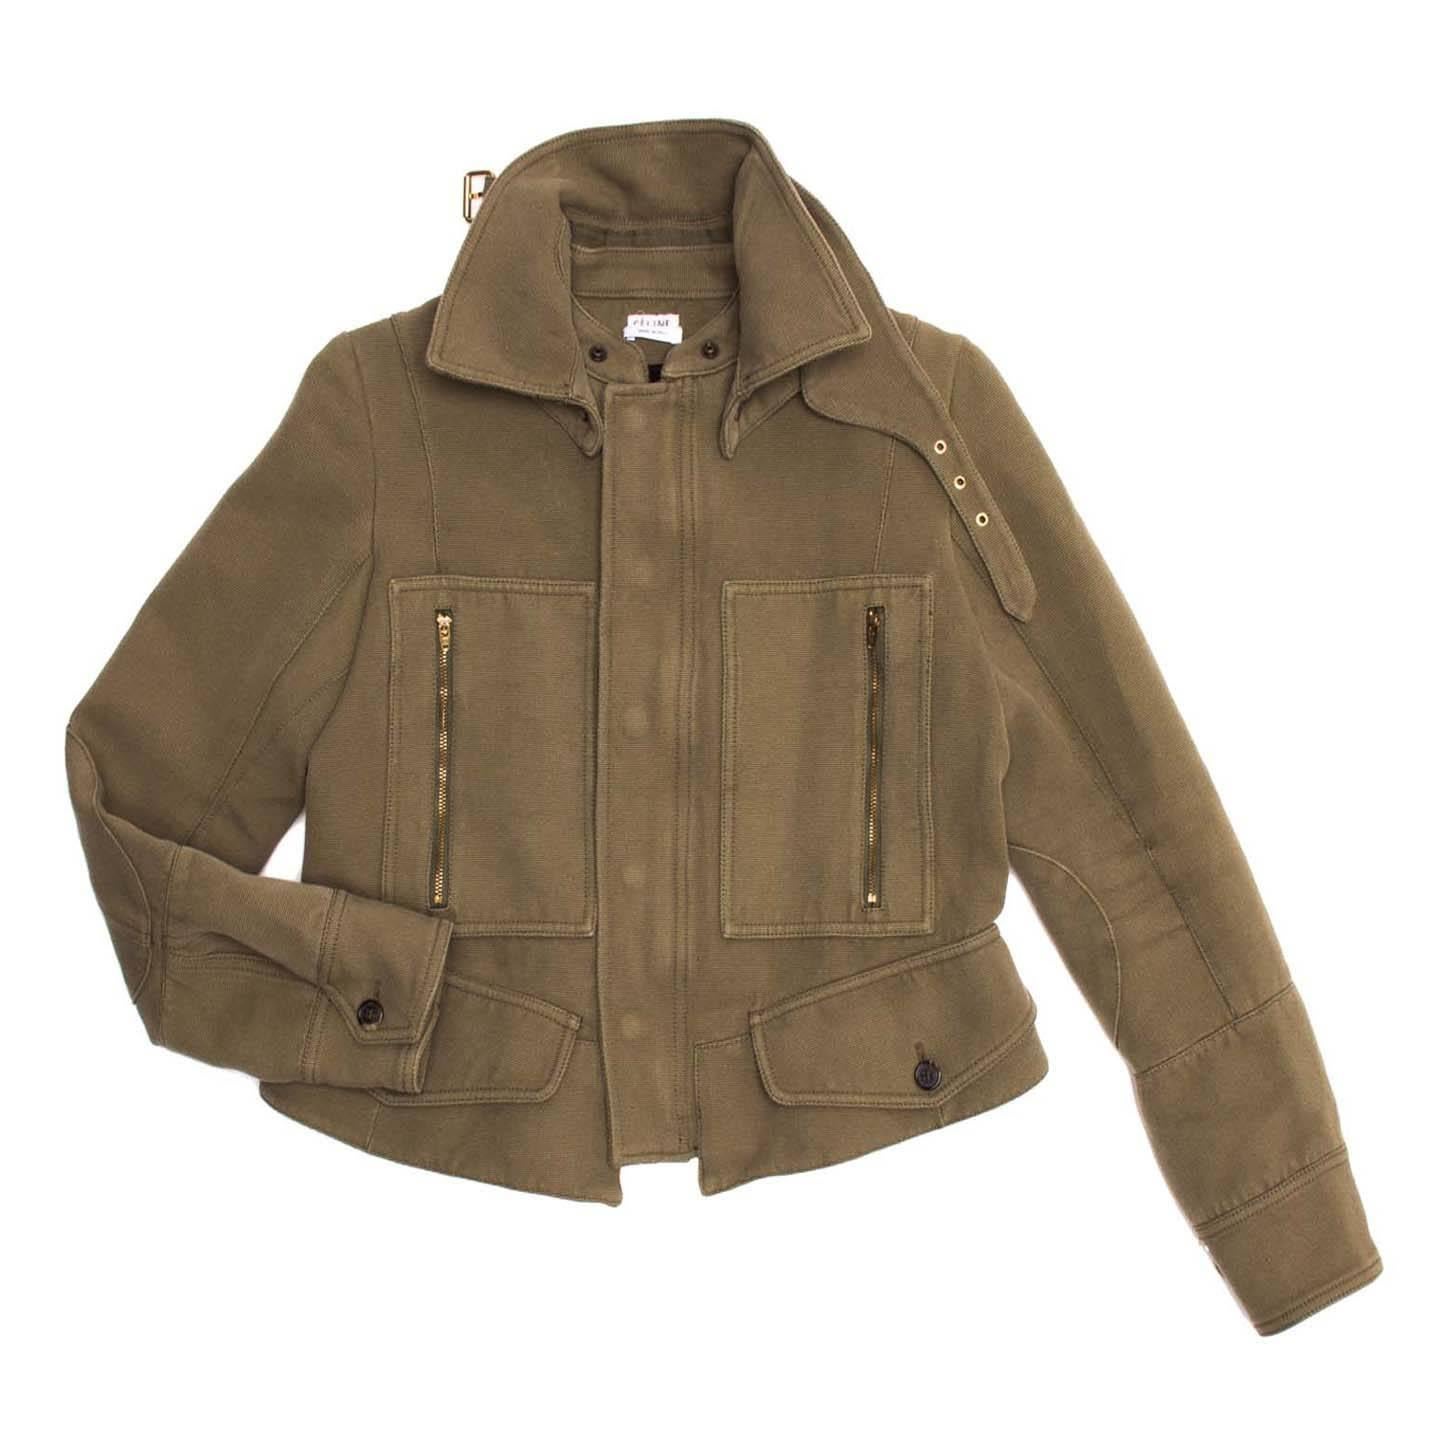 Celine army green heavy canvas eisenhower jacket with detachable collar.

Size  40 French sizing

Condition  Excellent: worn a few times